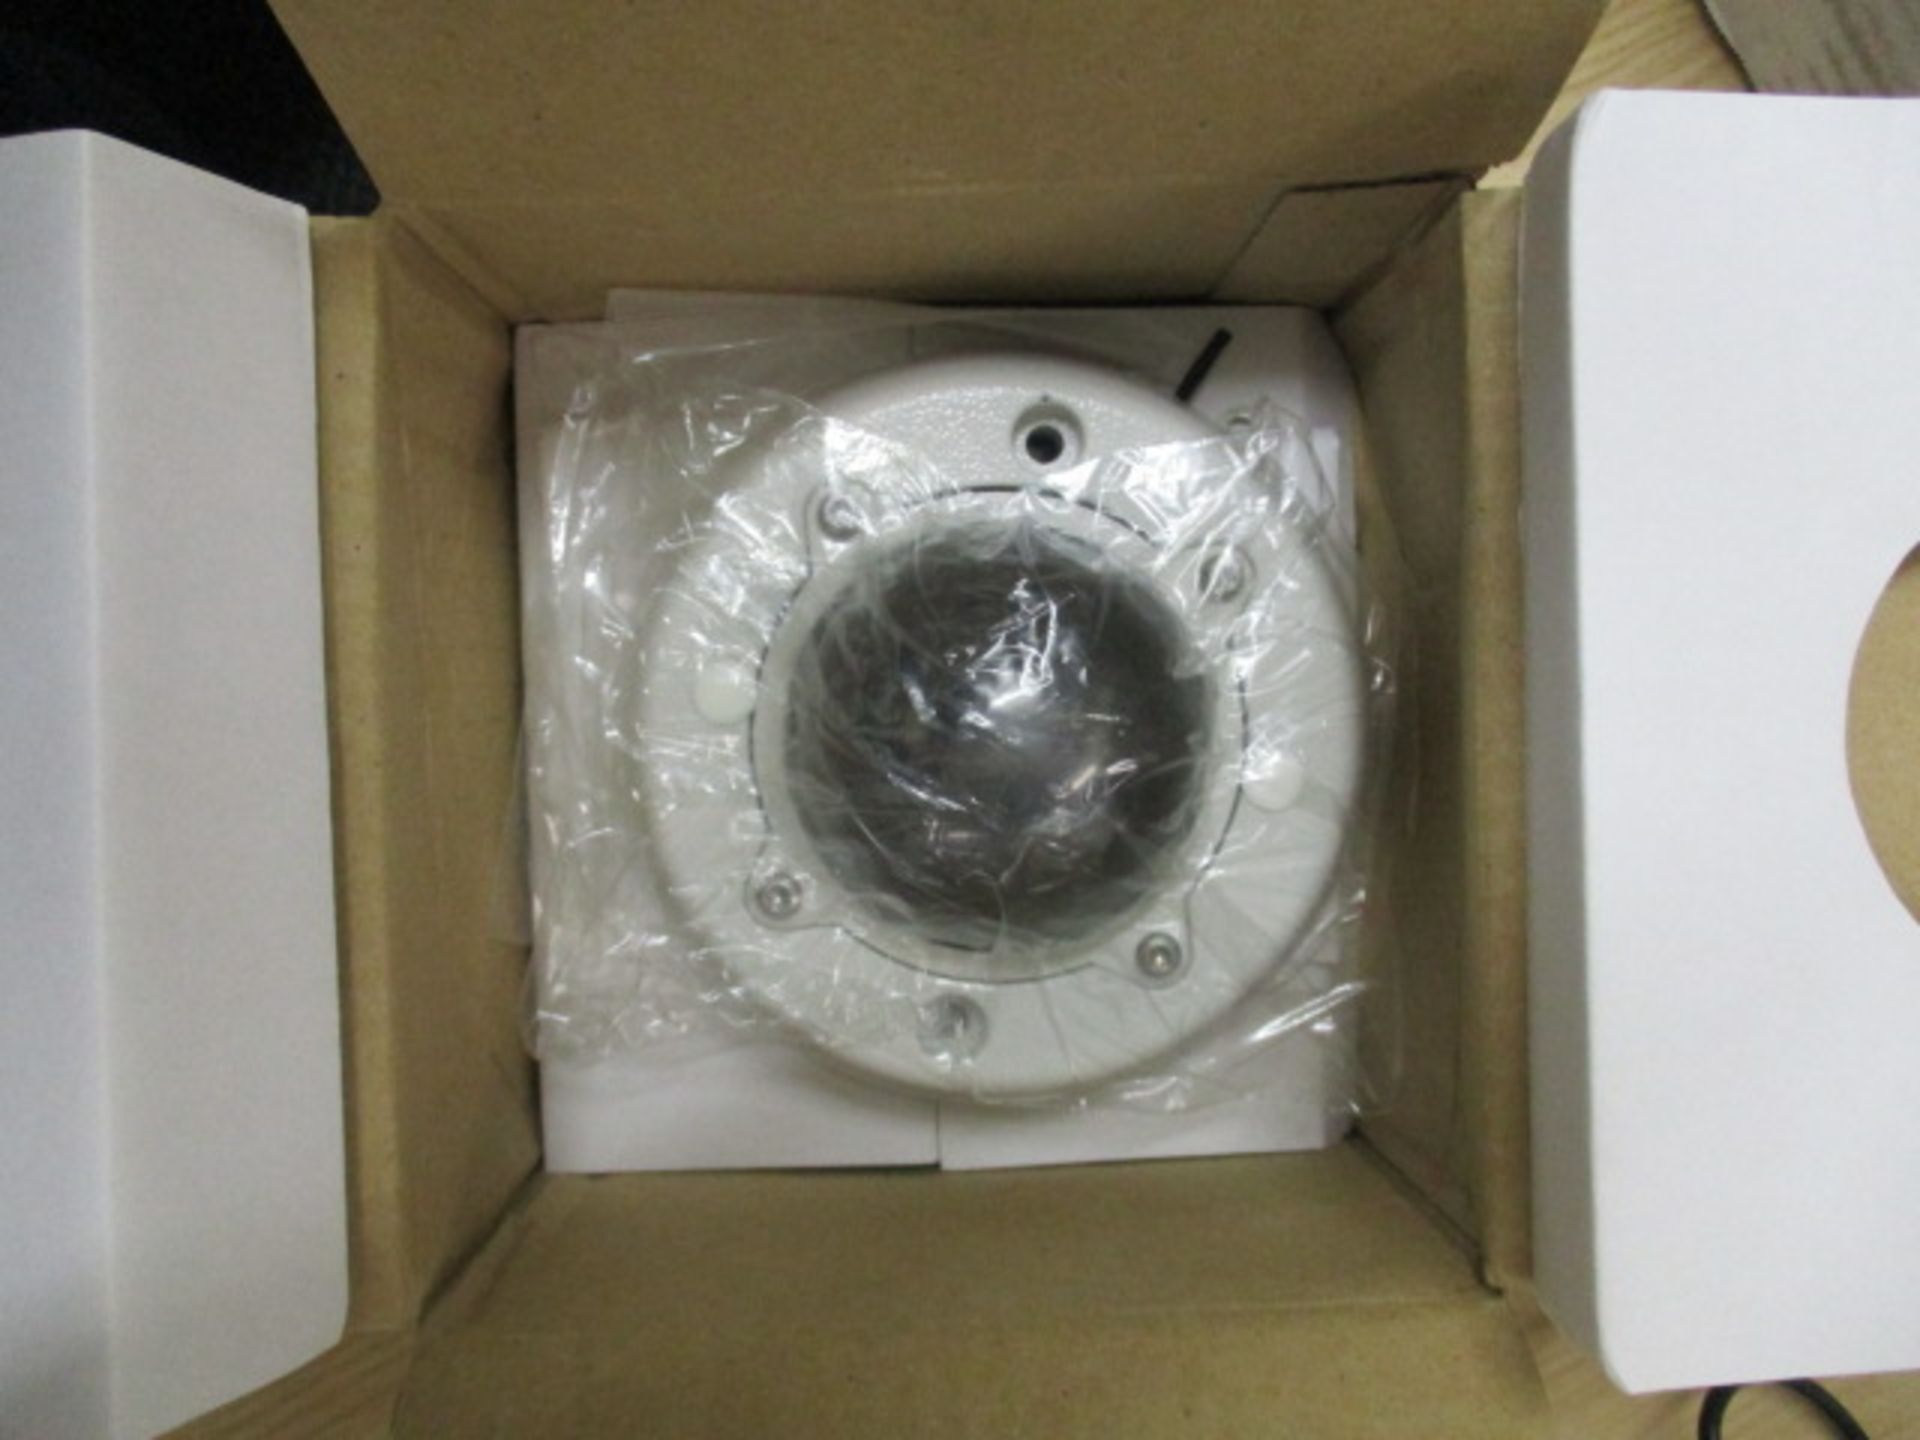 4 x Dedicated Micros DM/1000-107 Dome Cameras Hi Res 6mm Lens/Smoked Hemisphere (Brand New & Boxed) - Image 2 of 3